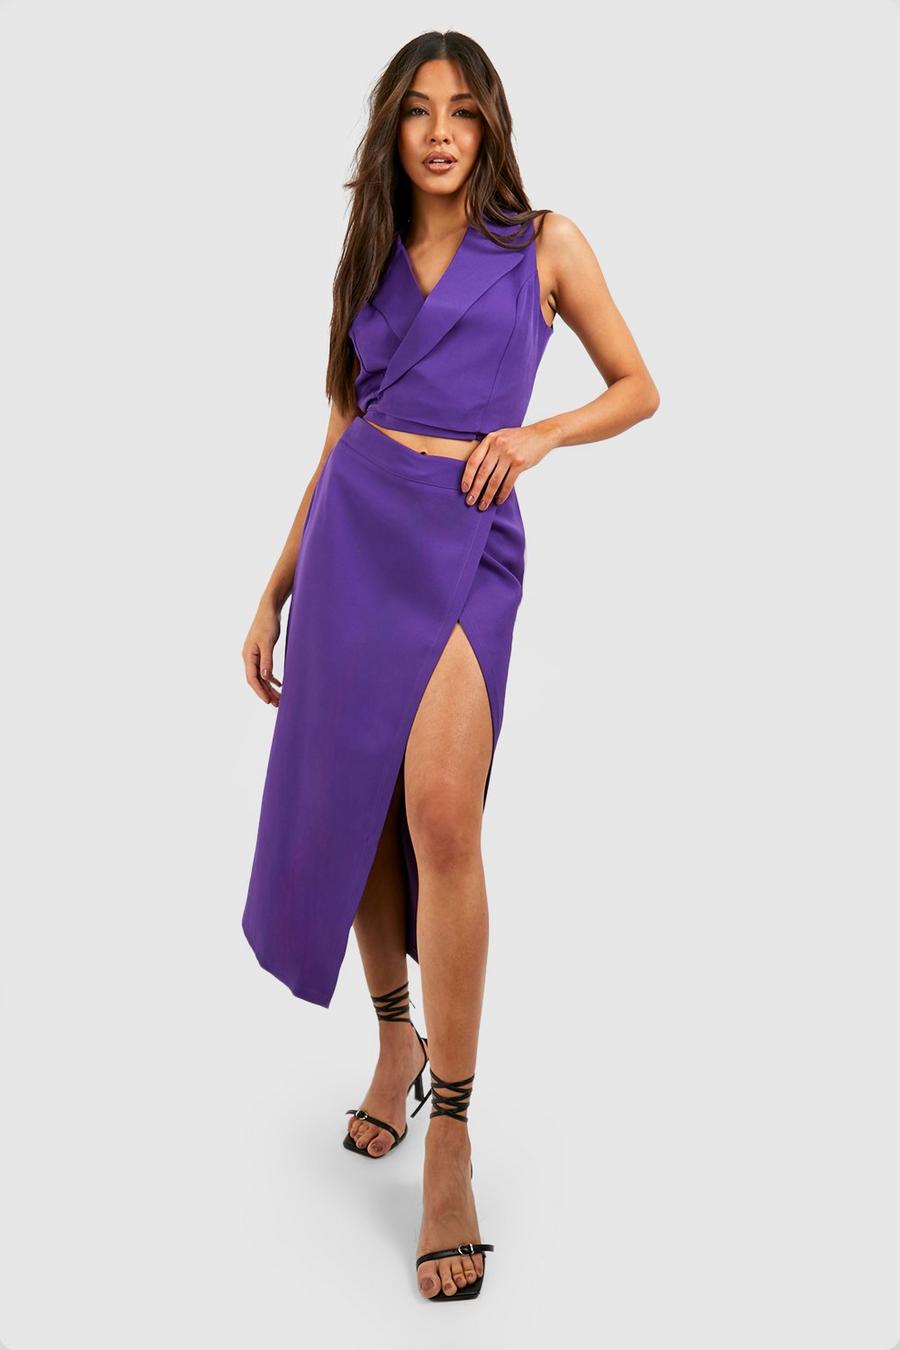 Jewel purple Thigh Split Wrap Front Tailored Maxi Skirt image number 1